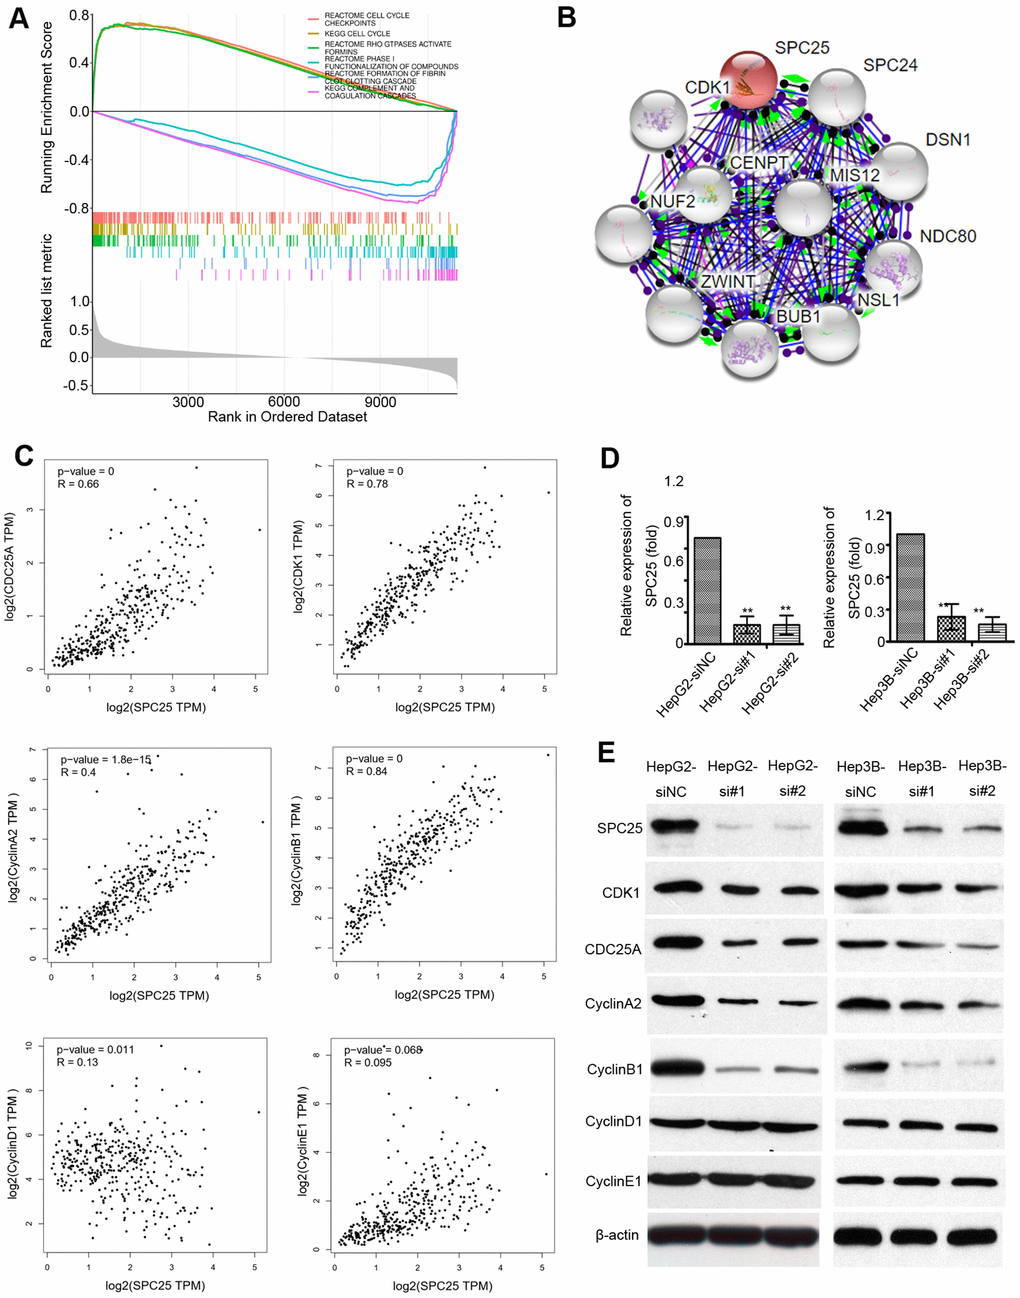 Mechanistic investigation into how SPC25 promotes HCCs growth. (A) Gene Set Enrichment Analysis (GSEA) shows statistically significant different biological function between subgroups of high SPC25 level and low SPC25 level. (B) STRING analysis of interactions between SPC25 and other proteins. (C) Correlation between SPC25 and cell cycle-regulation related genes, including CDK1, cdc25A, Cyclin A2, Cyclin B1, Cyclin D1, Cyclin E1. (D) Two siRNAs (si#1 and si#2) against SPC25 effectively silenced SPC25 expression, as determined by qRT-PCR. Negative control siRNA (siNC) and β-actin were used as negative and endogenous controls, respectively. The data are represented as the mean ± s.d. of three independent experiments. **P E) Silencing SPC25 decreased the protein level of SPC25, CDK1, cdc25A, Cyclin A2, Cyclin B1, Cyclin D1, and Cyclin E1.